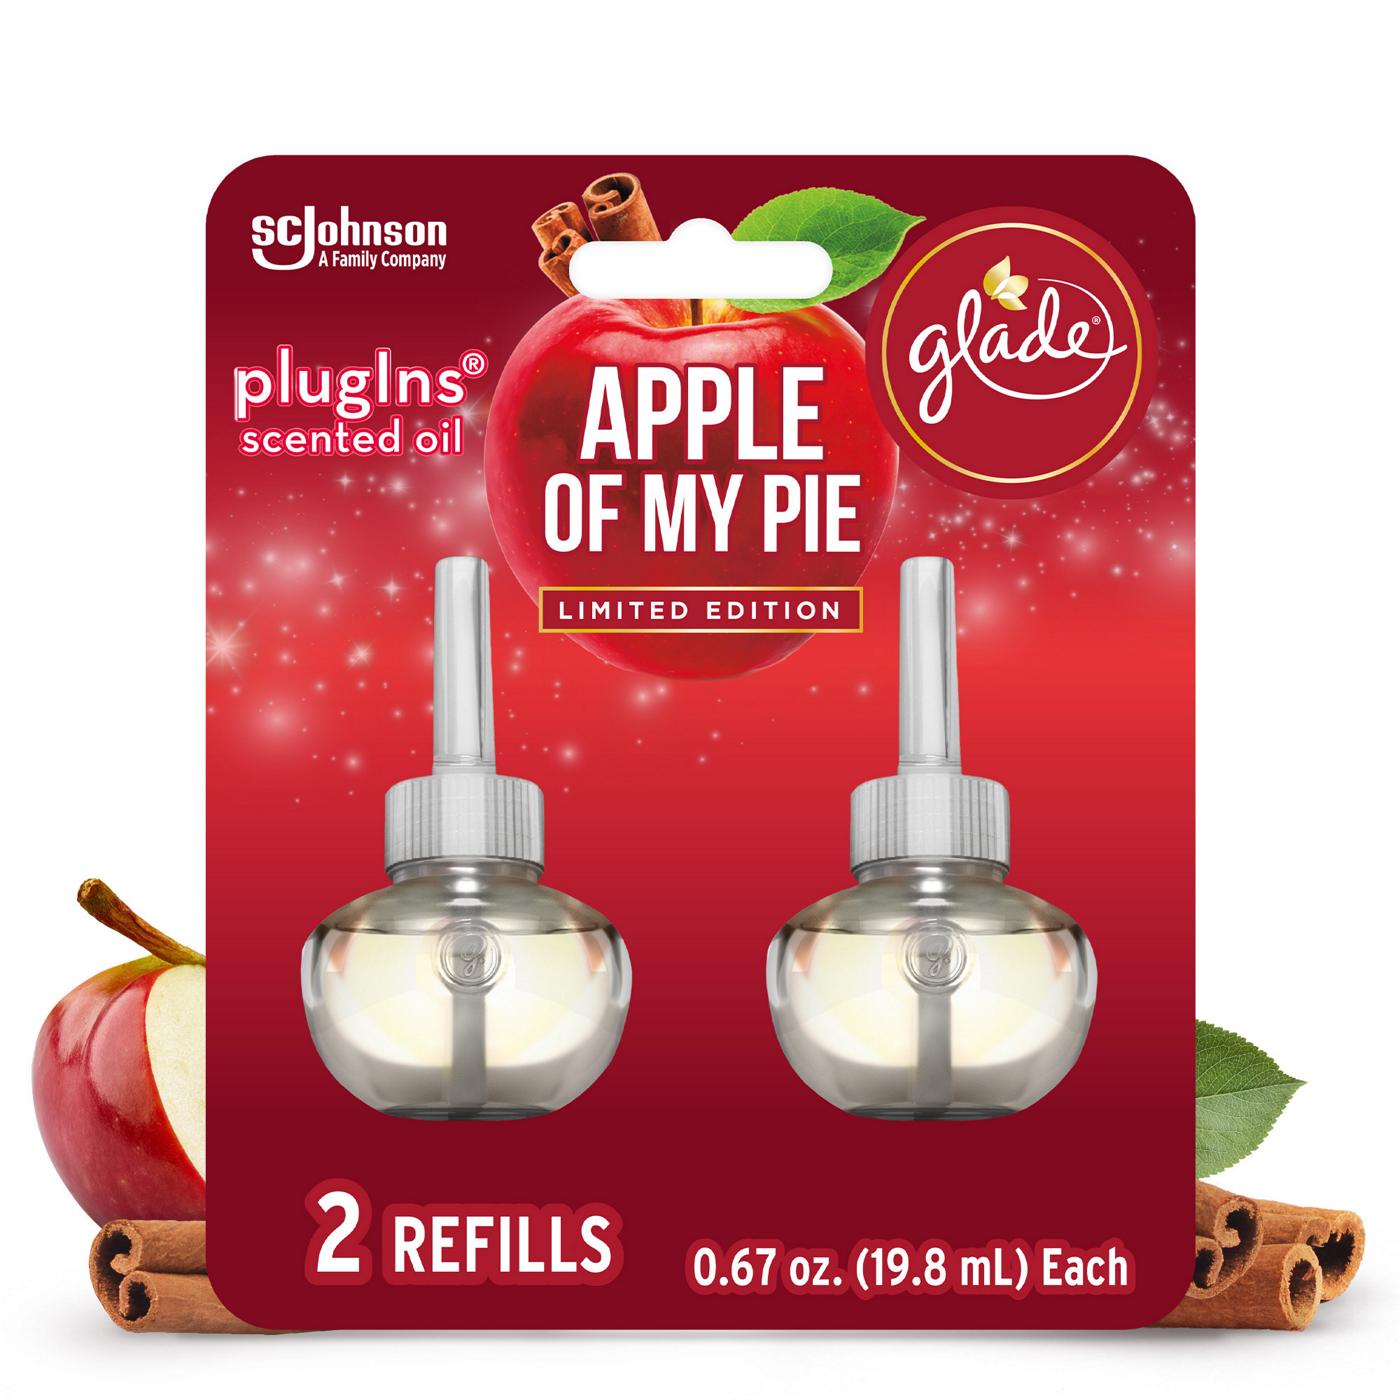 Glade PlugIns Scented Oil Air Freshener Refills - Apple of My Pie; image 2 of 3